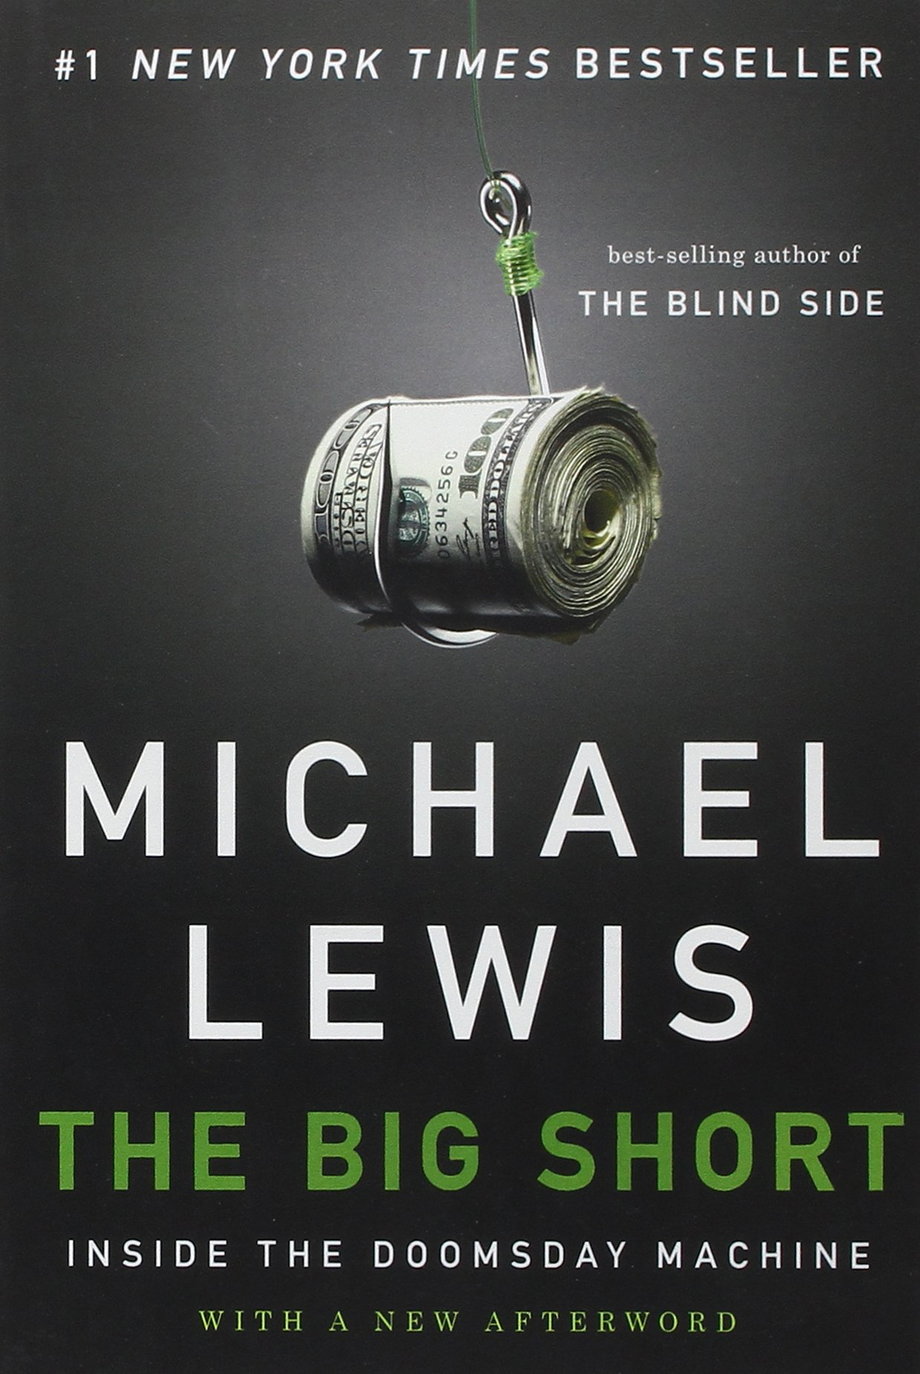 'The Big Short' by Michael Lewis